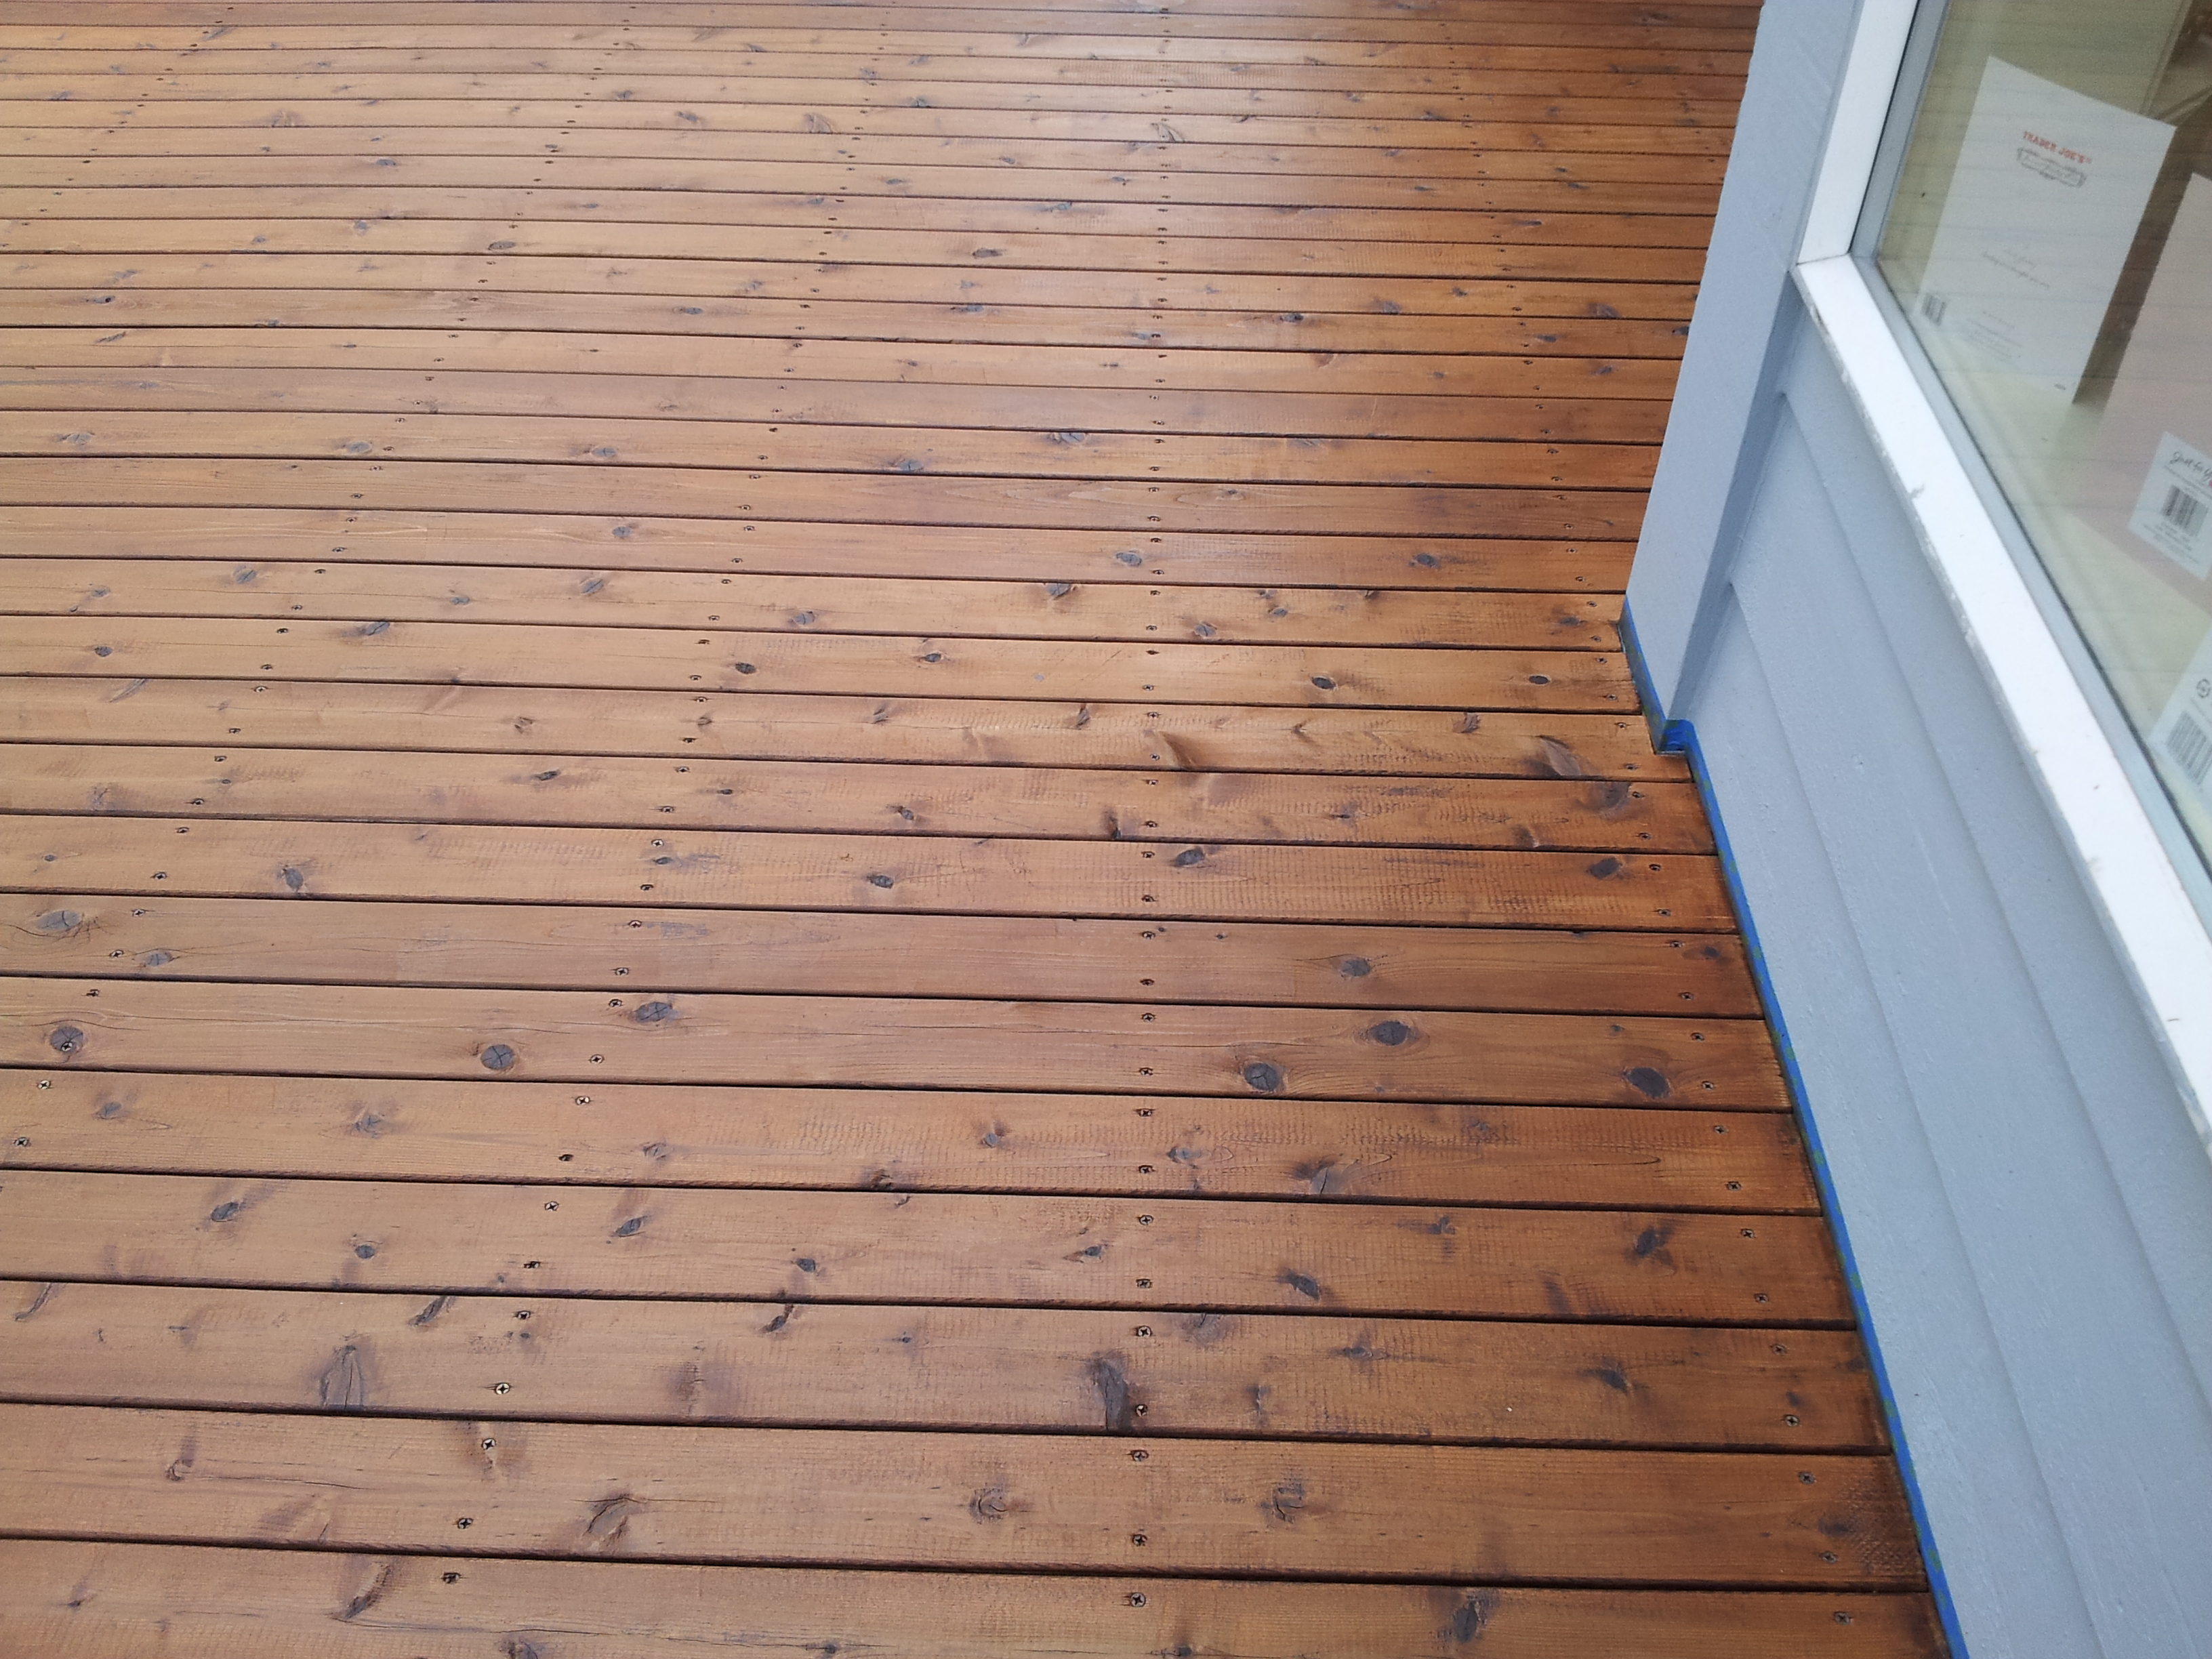 Oil Based Deck Stains 2019 Best Deck Stain Reviews Ratings inside size 3264 X 2448